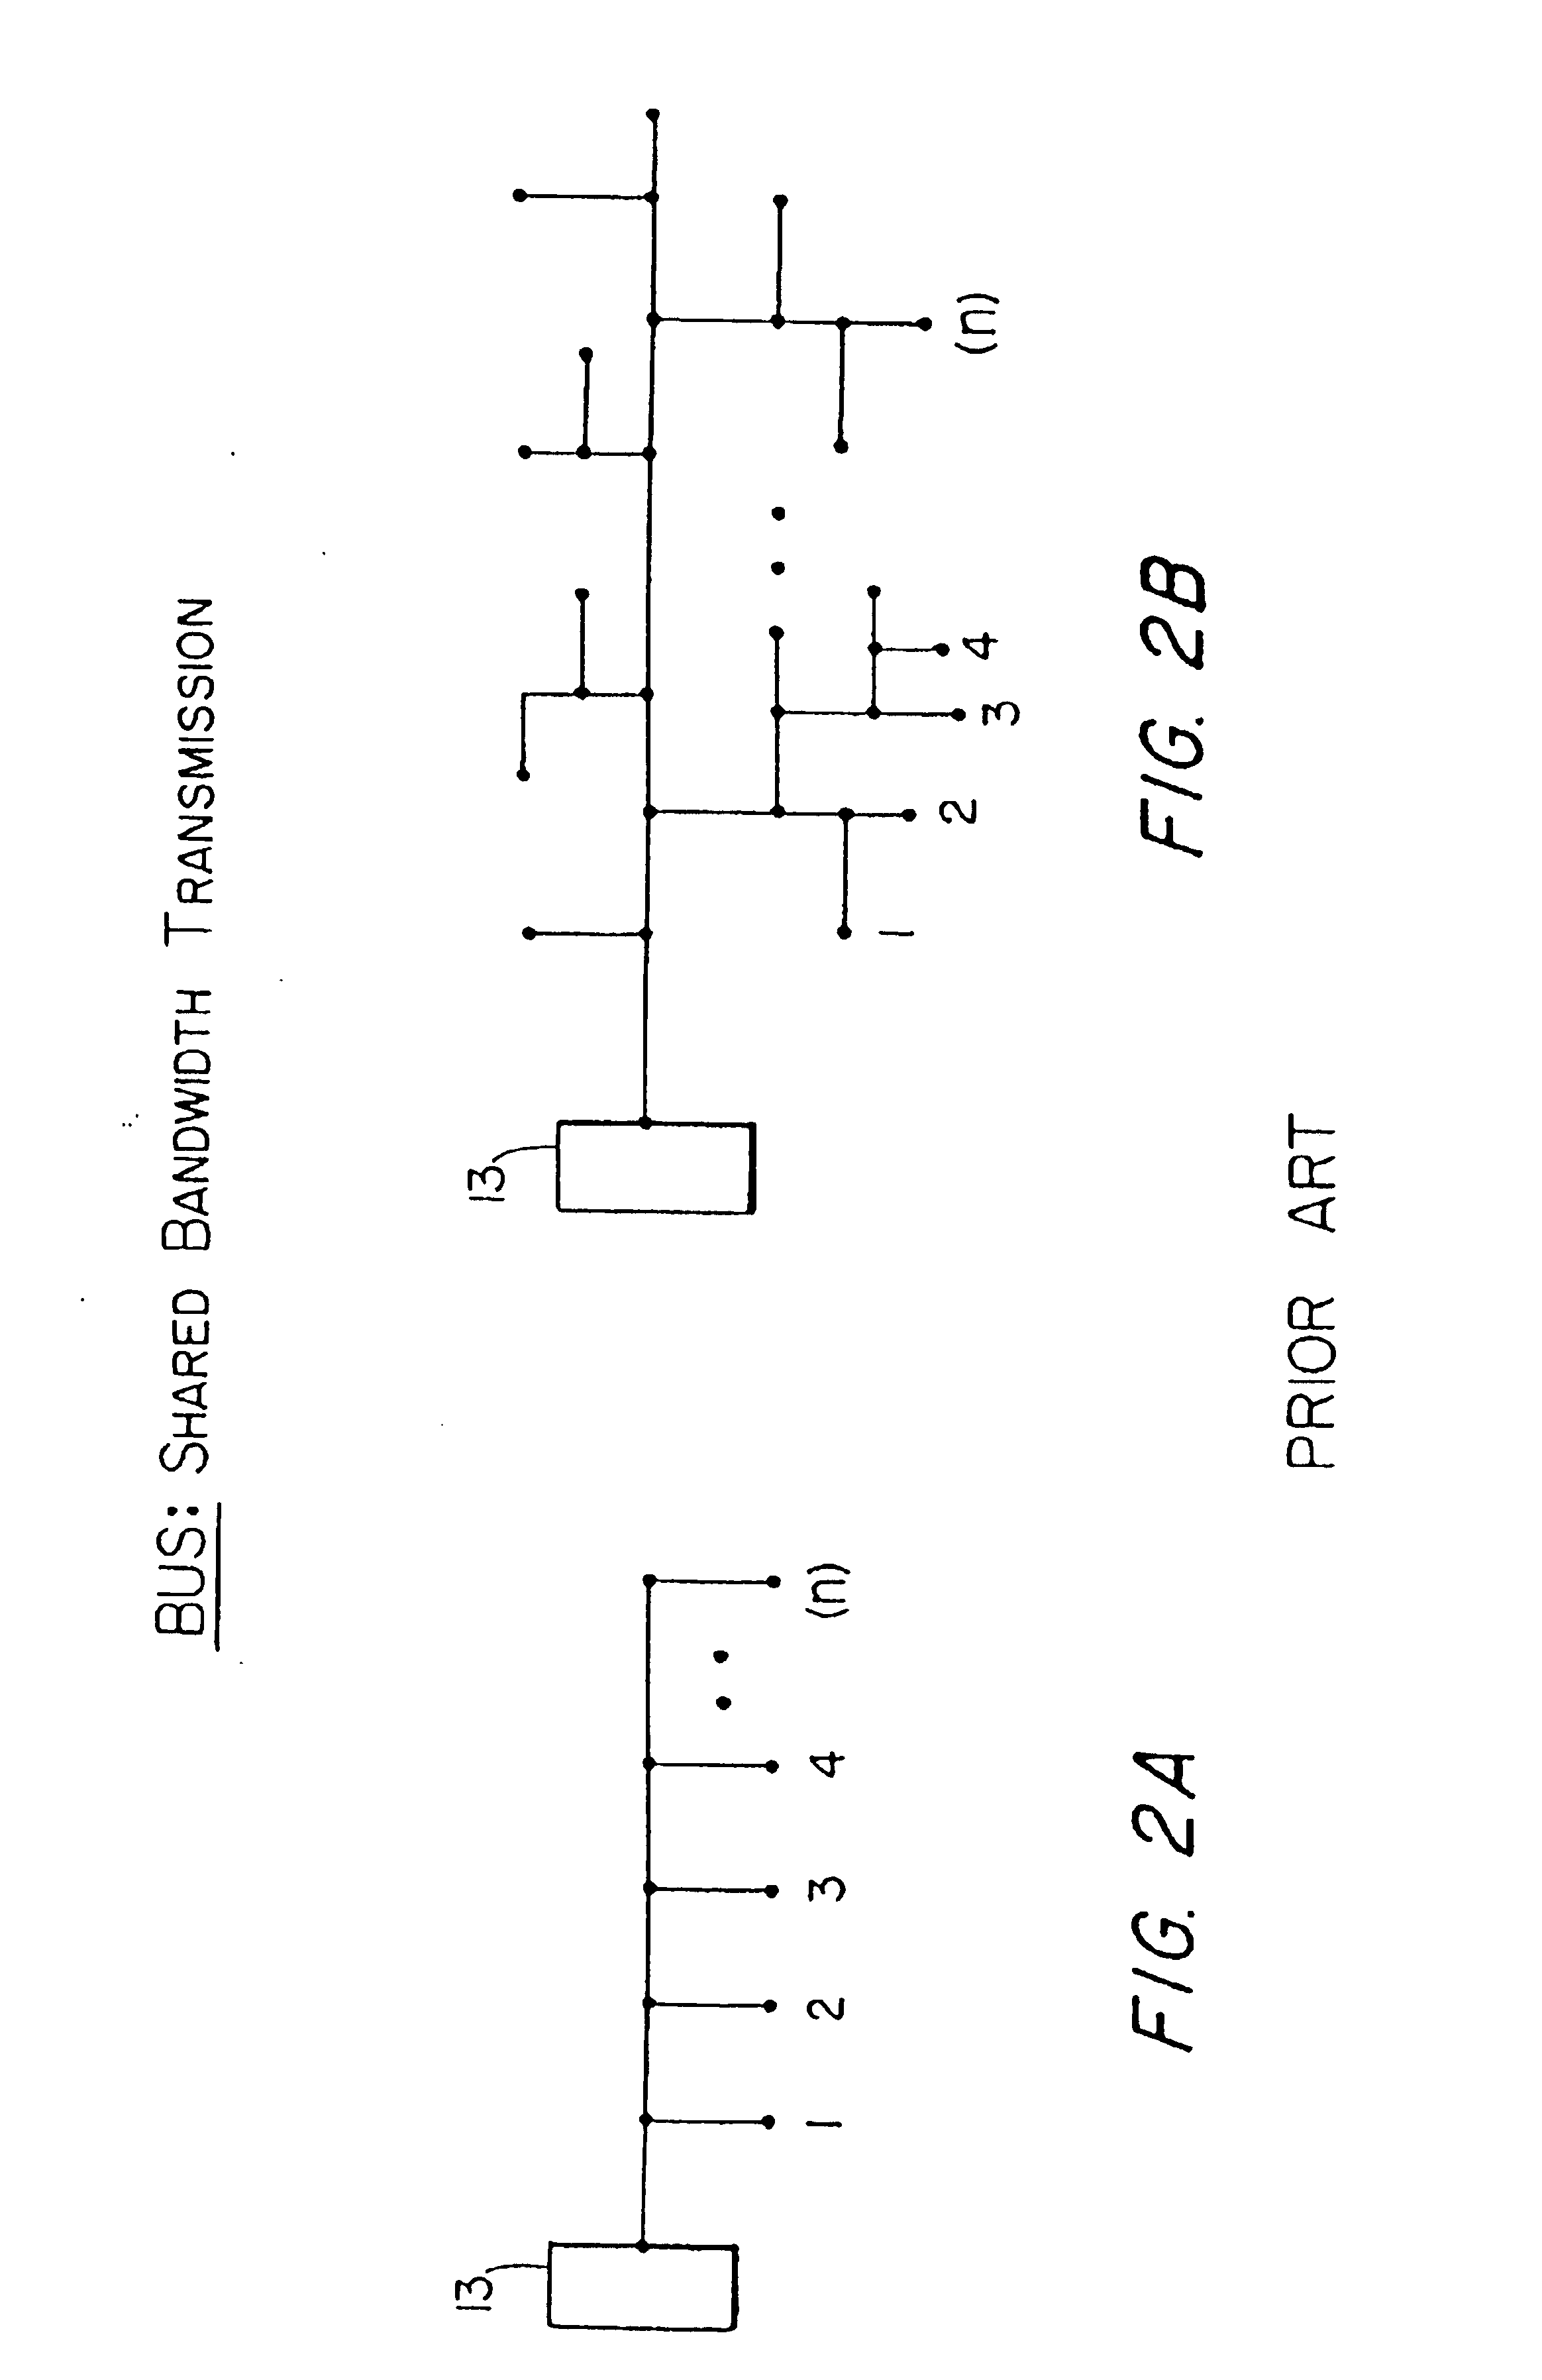 Method and apparatus for delivering secured telephony service in a hybrid coaxial cable network